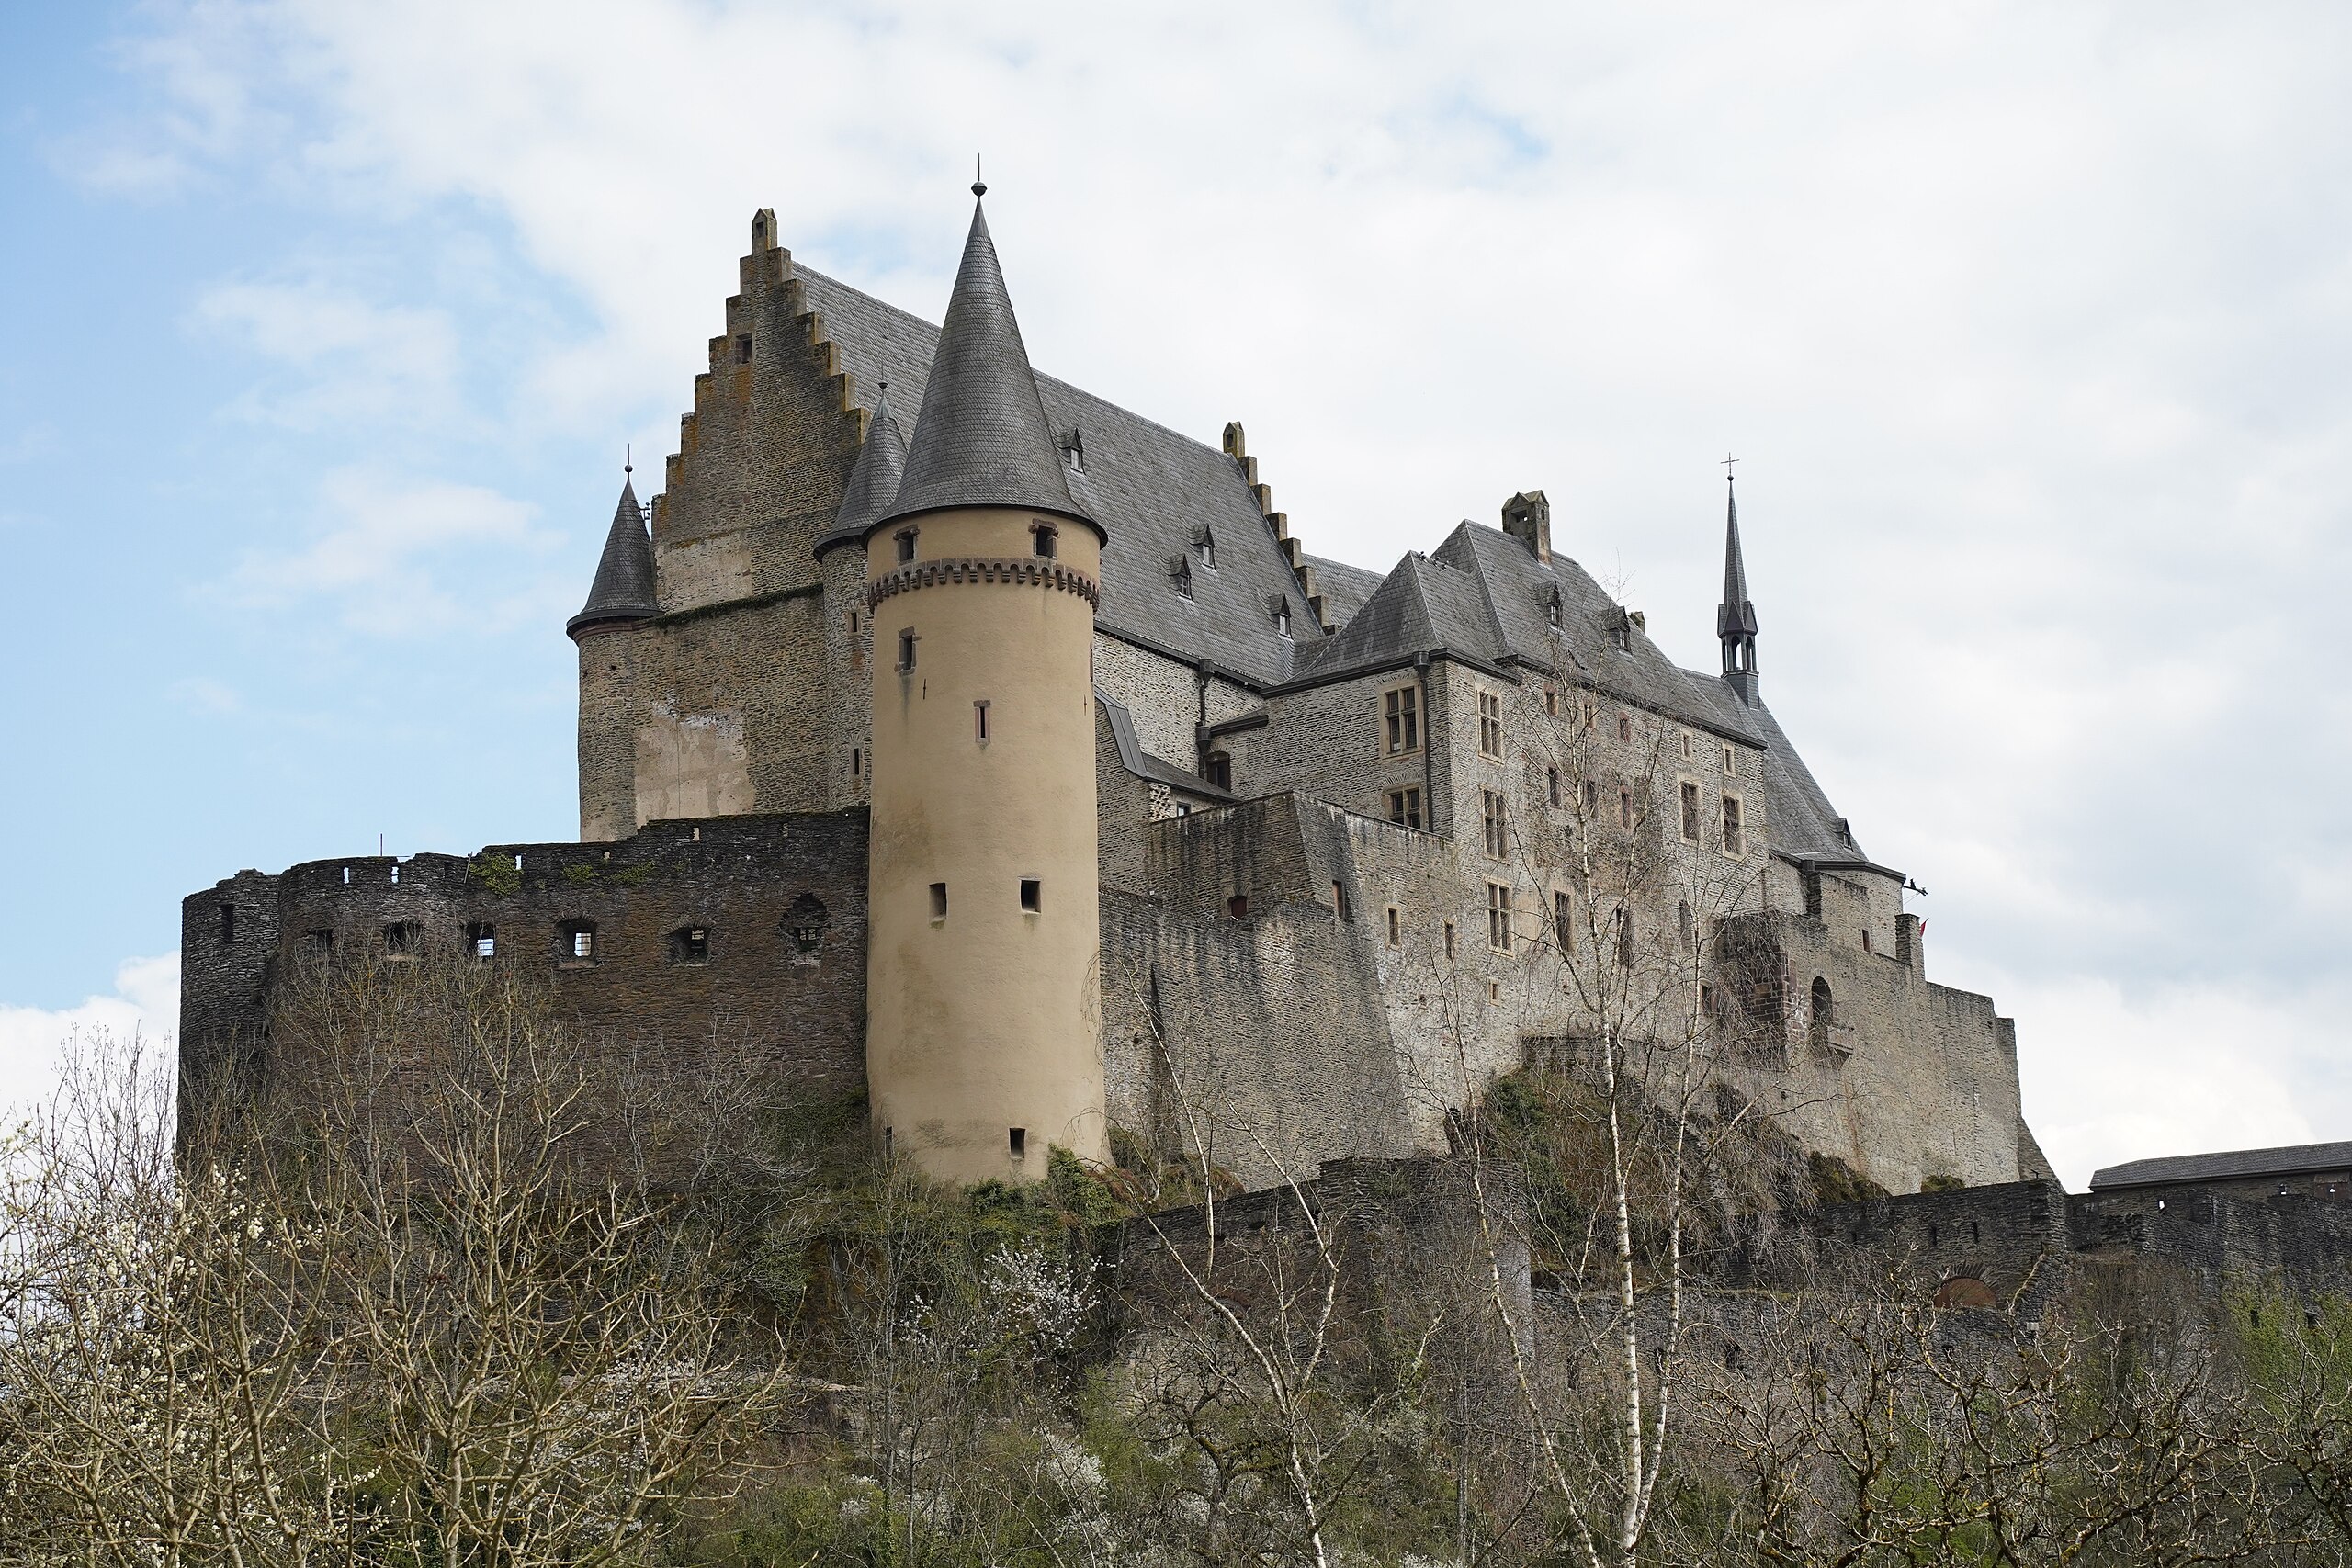 <p>Construction on Vianden Castle began in the 11th century and didn’t end until the 14th century. </p>  <p>It was built over an ancient Roman watchtower and was the royal home of the count of Vianden until the early 15th century.</p>